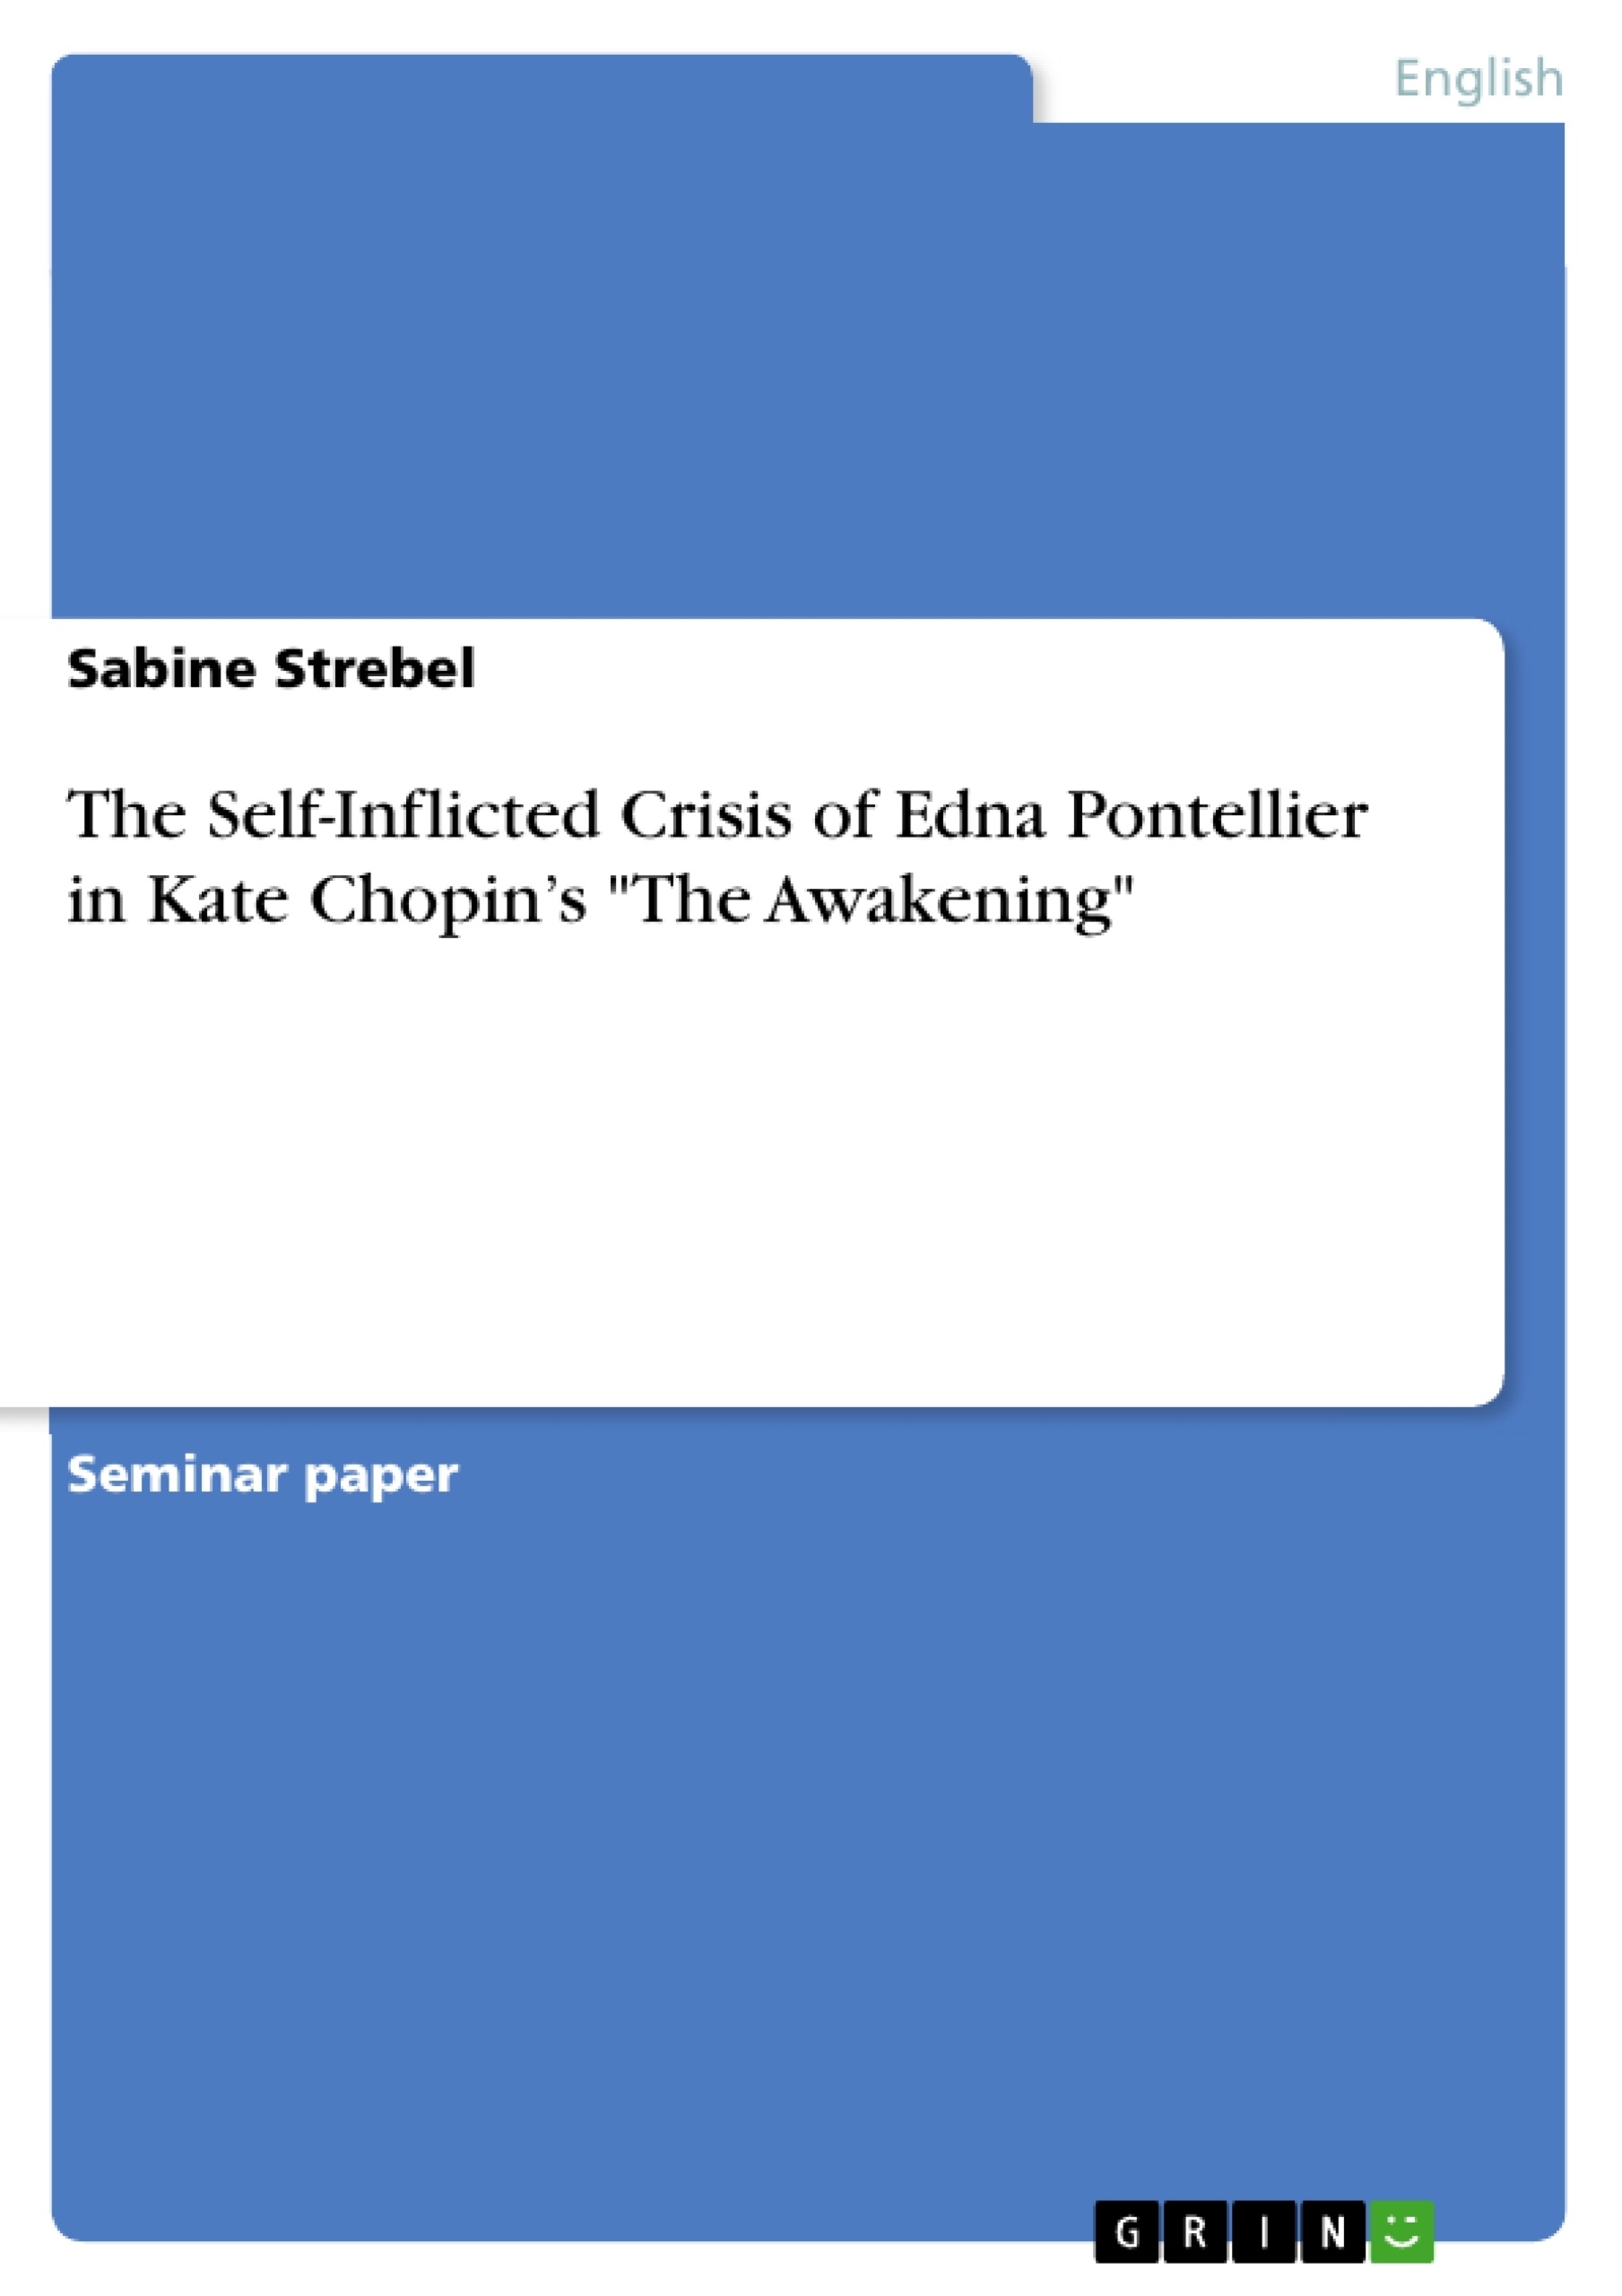 Title: The Self-Inflicted Crisis of Edna Pontellier in Kate Chopin’s "The Awakening"